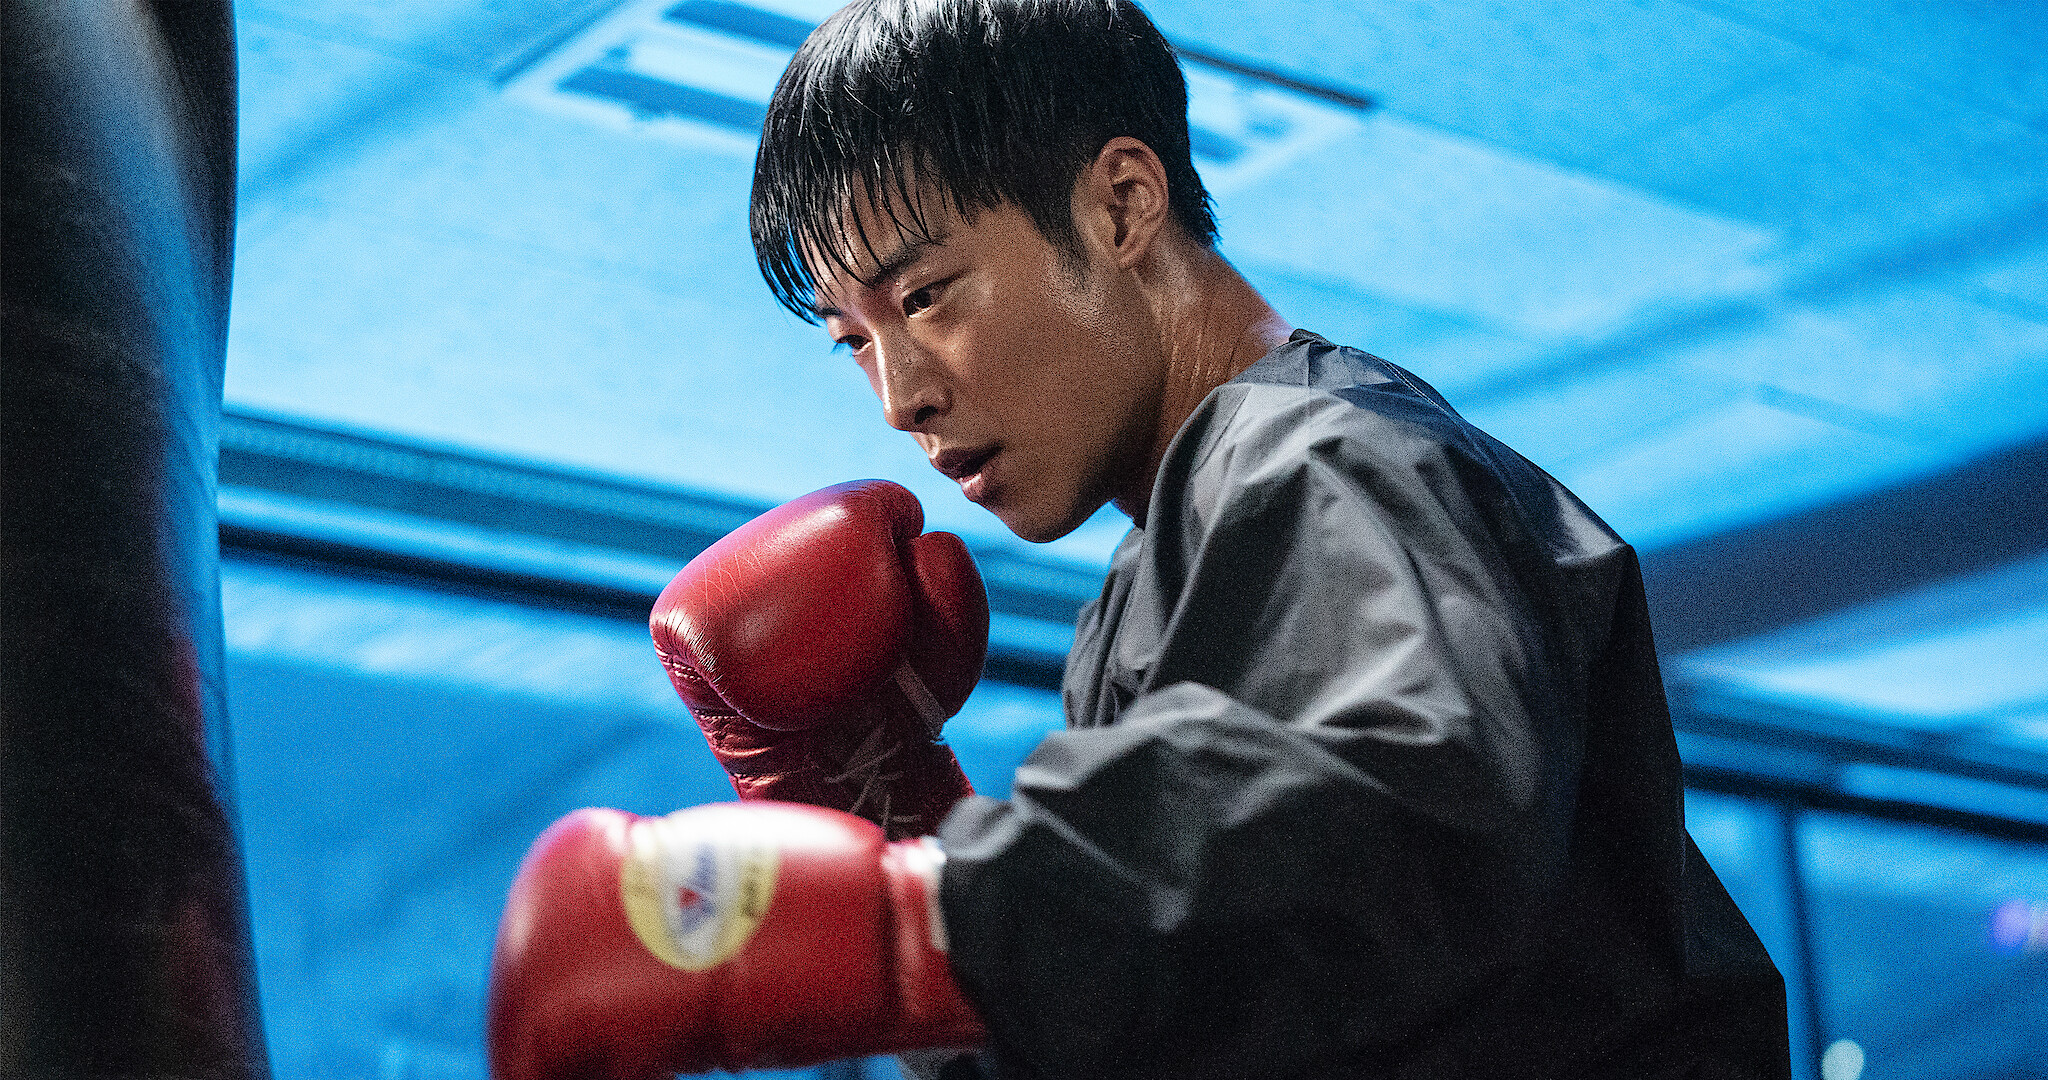 Bloodhounds, What You Need to Know About the Korean Action Thriller K-Drama Series pic pic